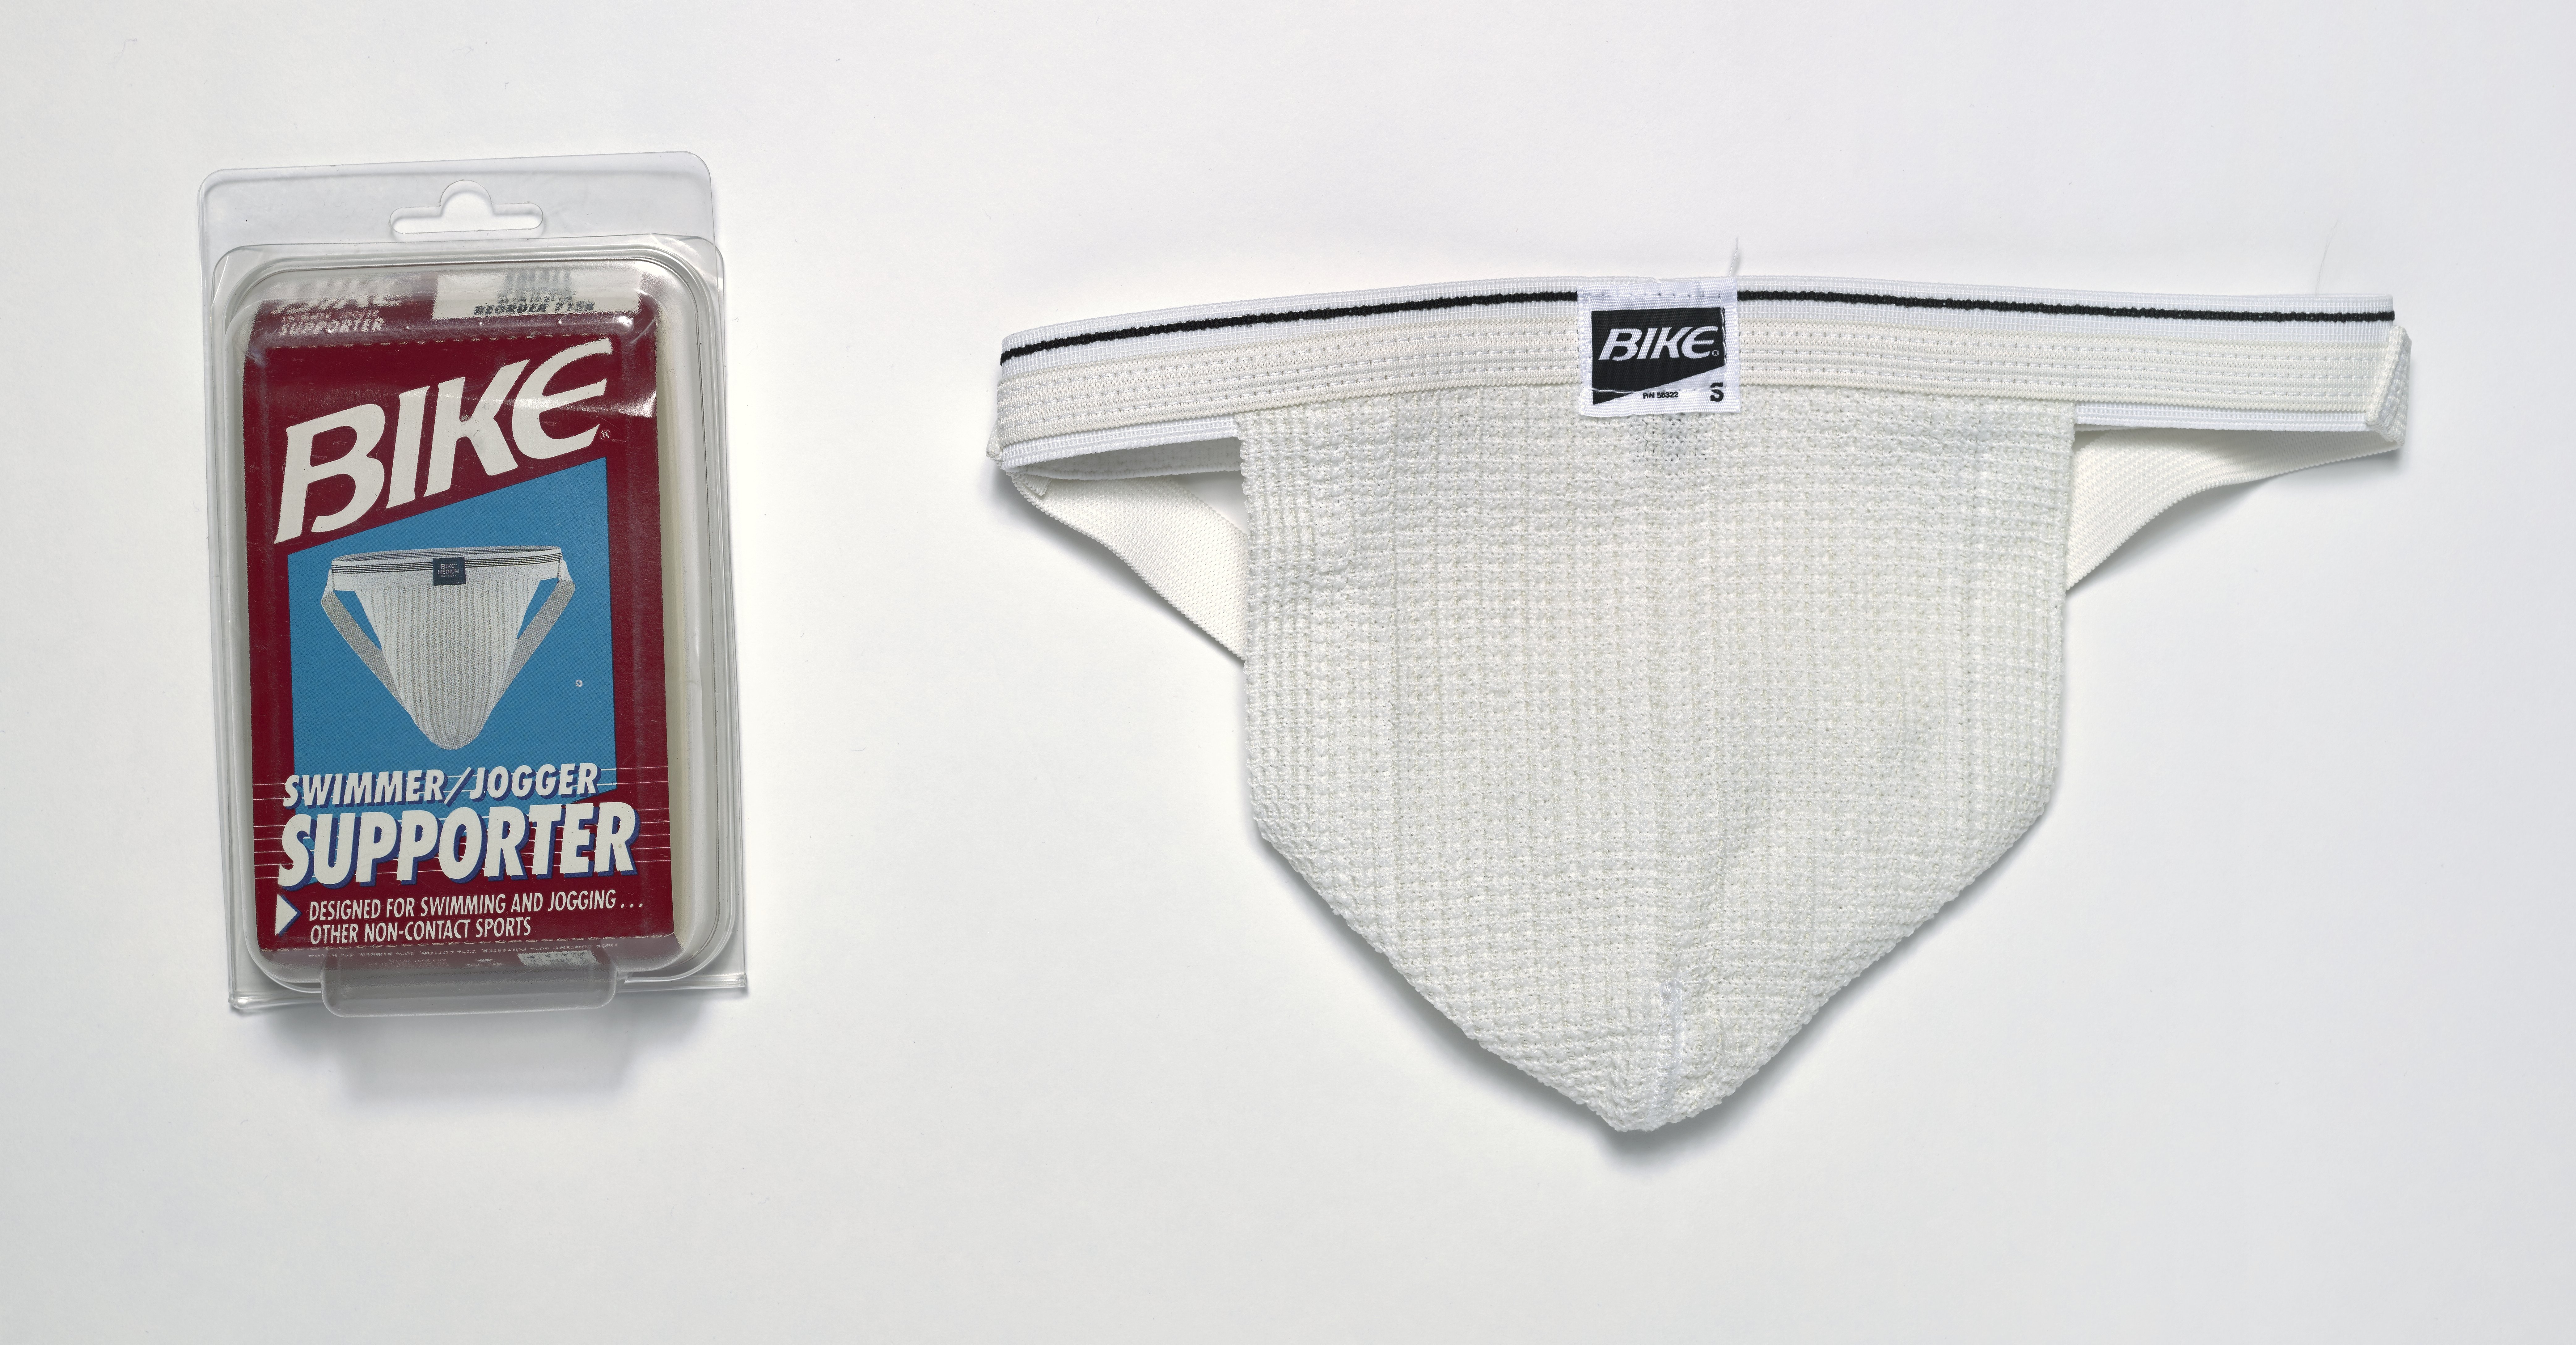 Bike Swimmer/Jogger Athletic Supporter - Science History Institute